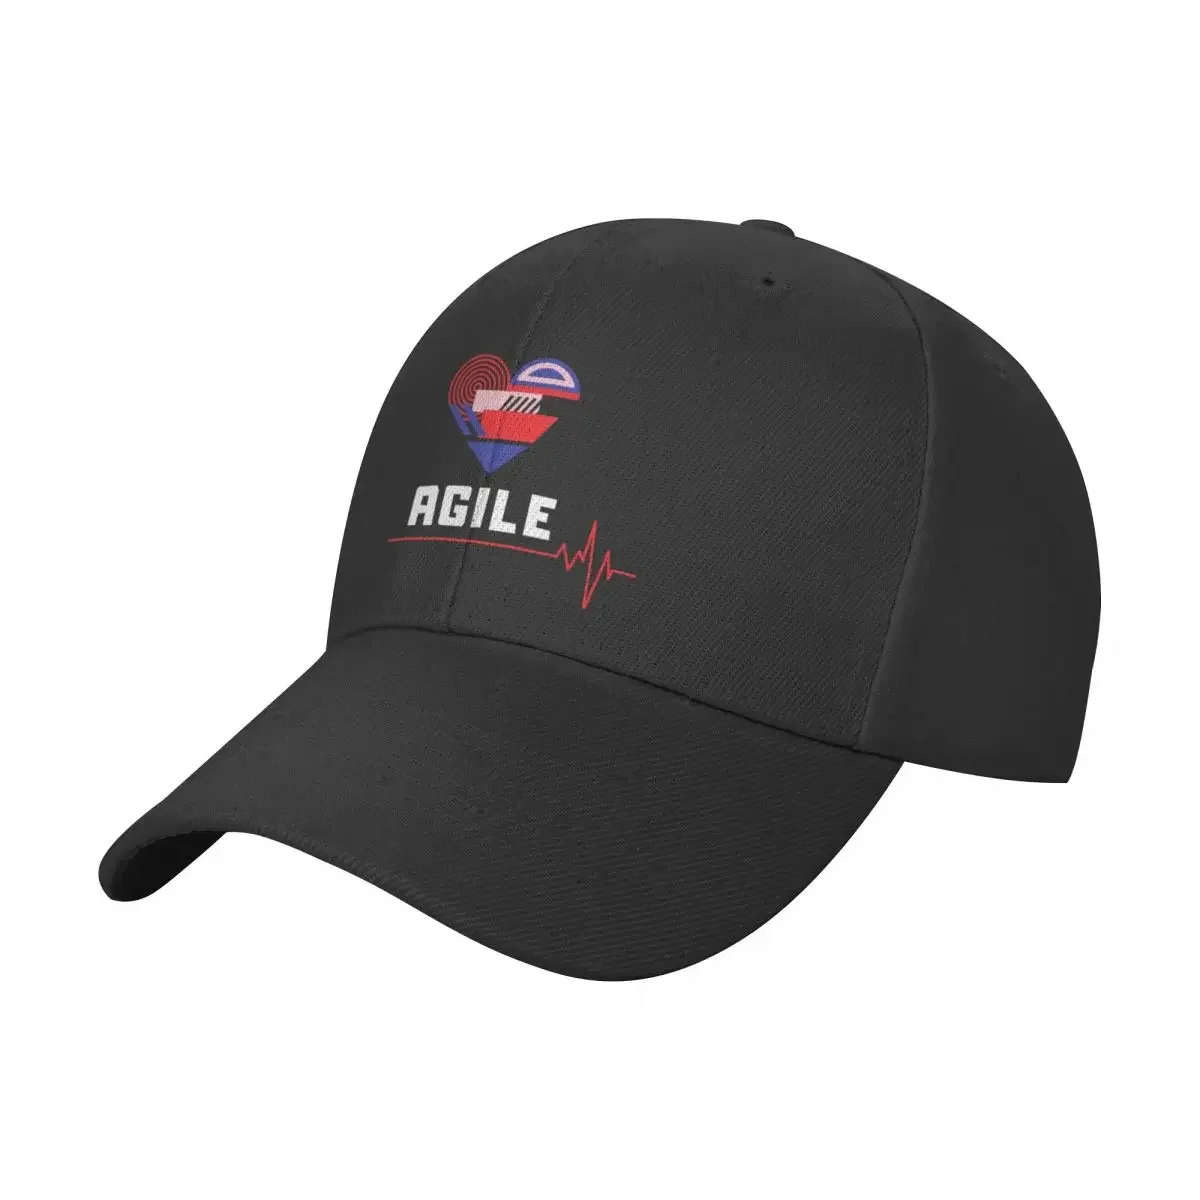 Agile Heart Baseball Cap Designer Hat New In Hat New In The Hat Women's Golf Clothing Men's muslim clothing diamond layered hat space laminated wrinkled toecap hat fashion solid color ethnic indian hat african clothing